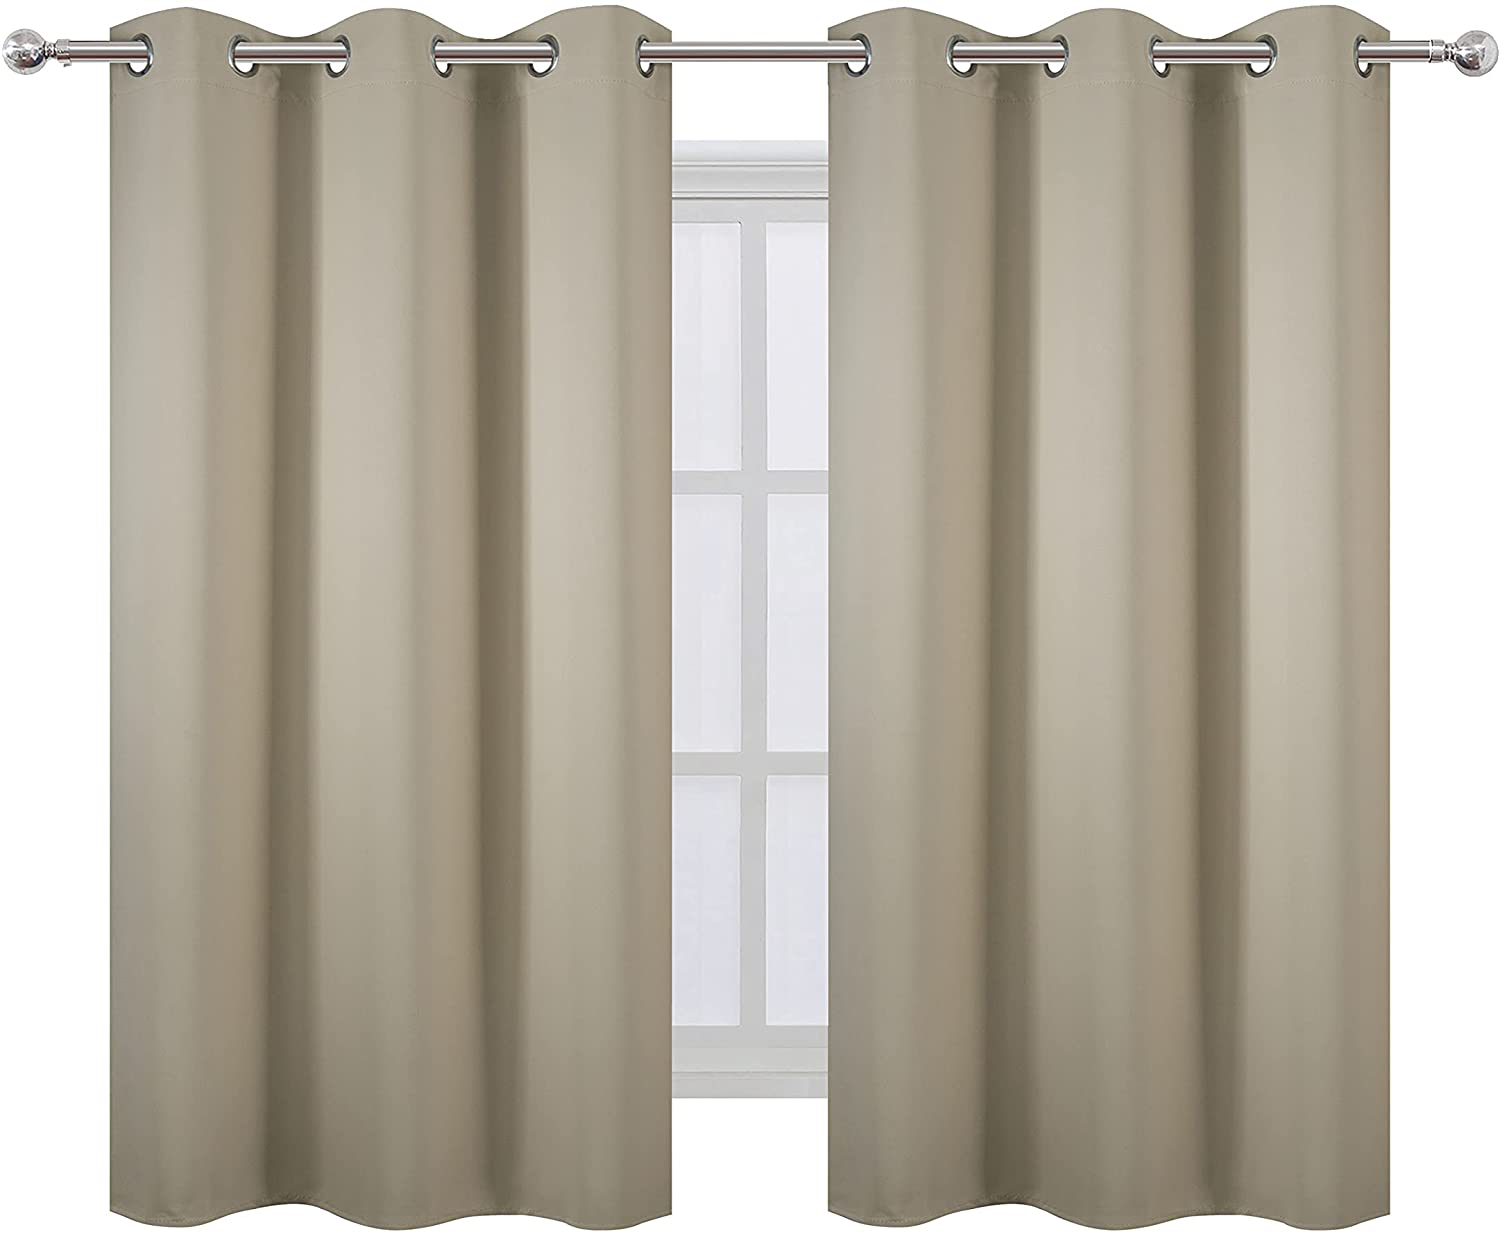 LEMOMO Teal Blackout Curtains/52 x 108 Inch/Set of 2 Panels Room Darkening Thermal Insulated Curtains for Bedroom